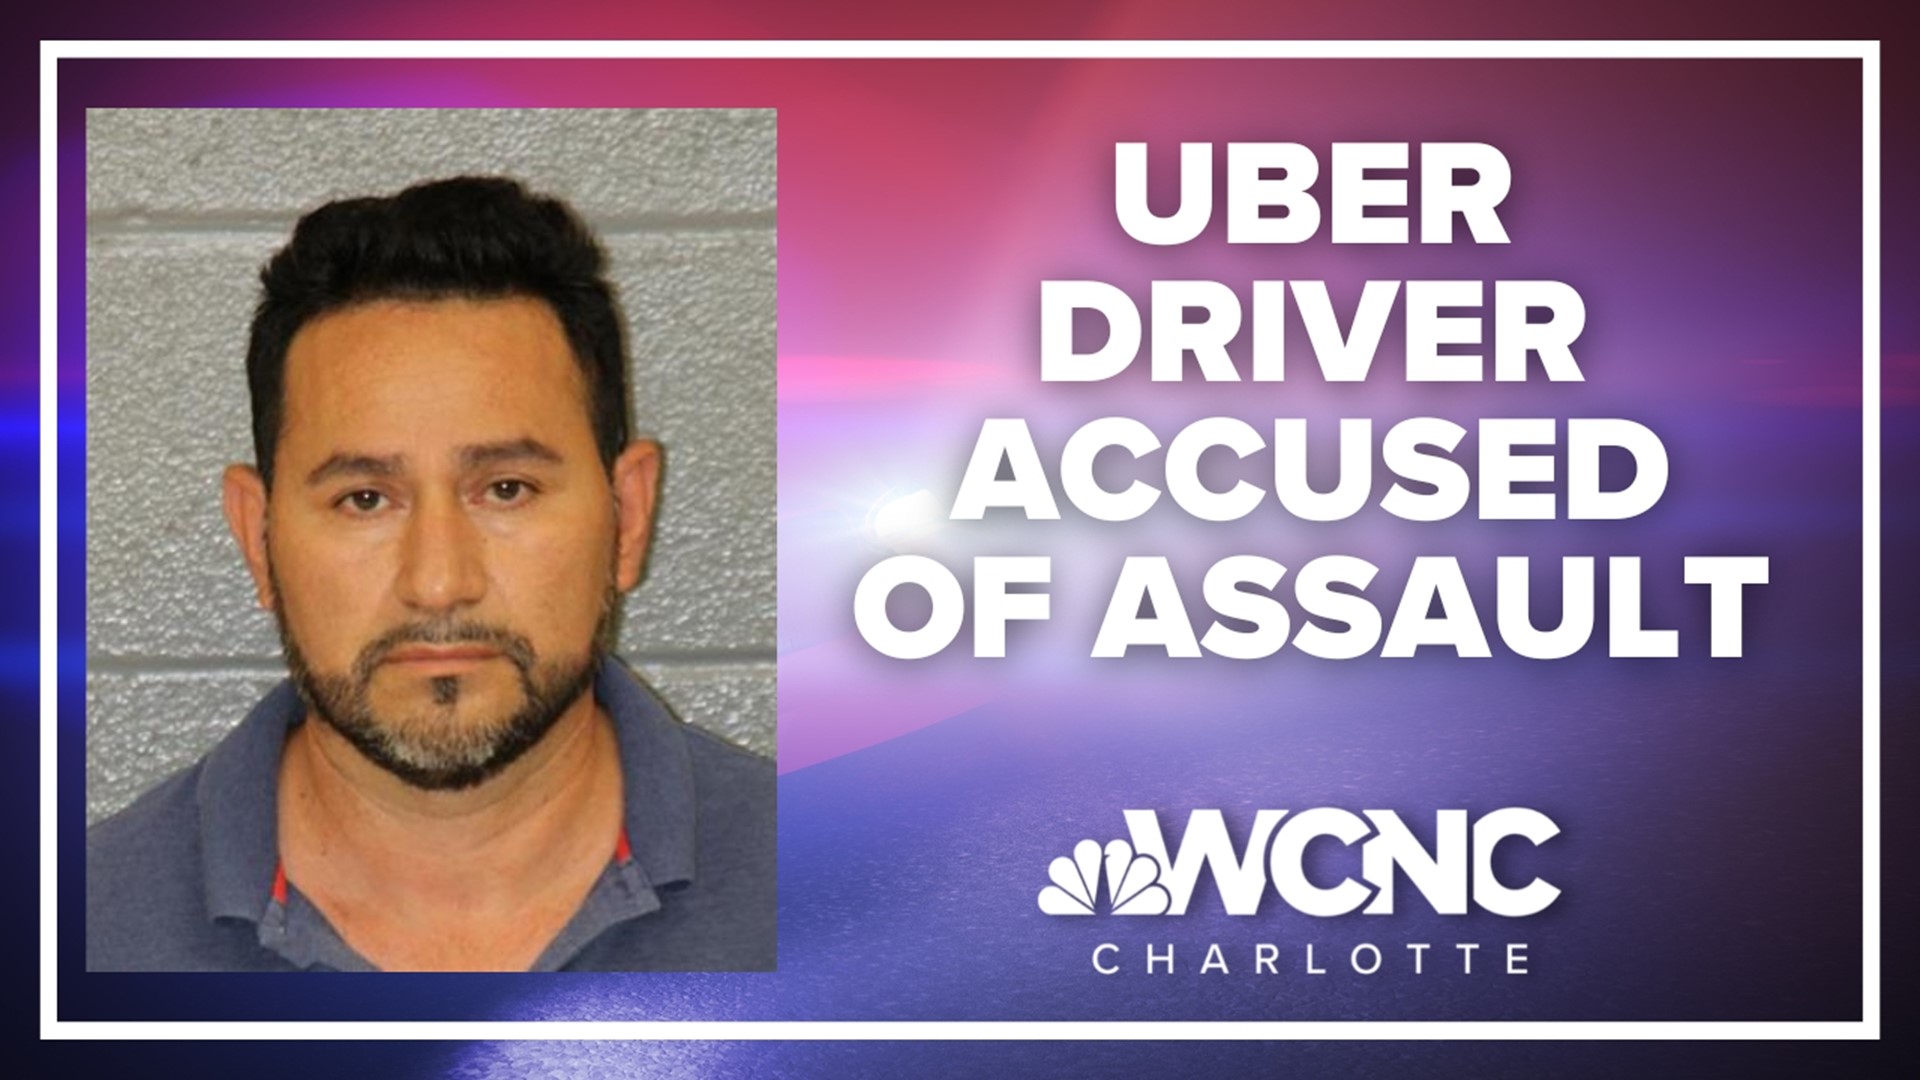 Uber driver charged in reported sexual assault wcnc